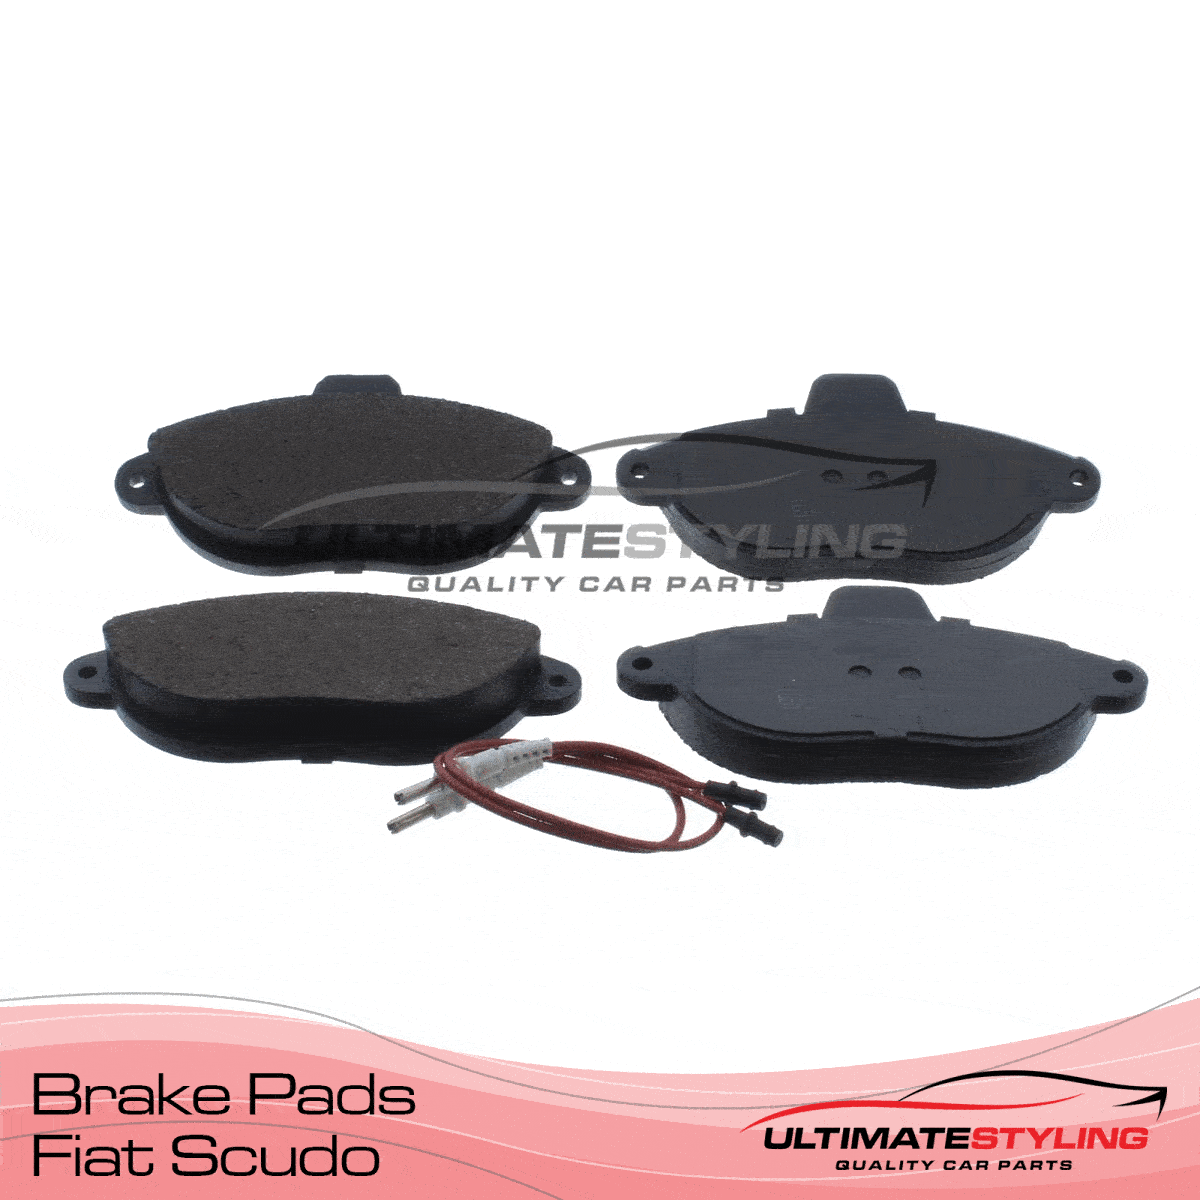 360 view of Fiat Scudo Brake Pads